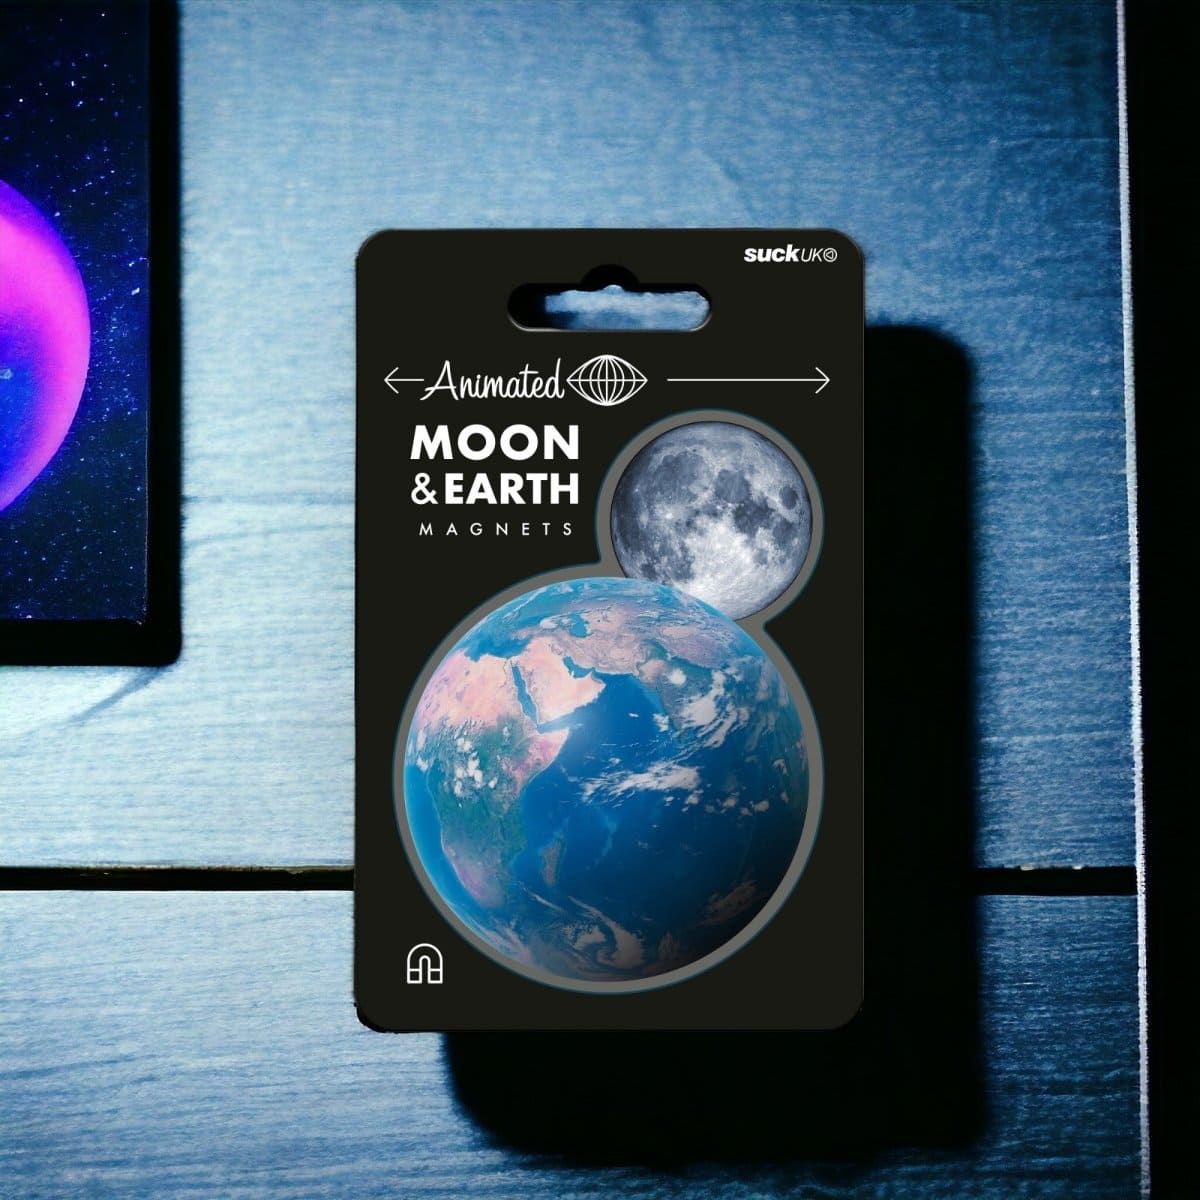 Animated Moon & Earth Magnets, Fridge Magnets, By SuckUK - Refrigerator Magnets by SuckUK